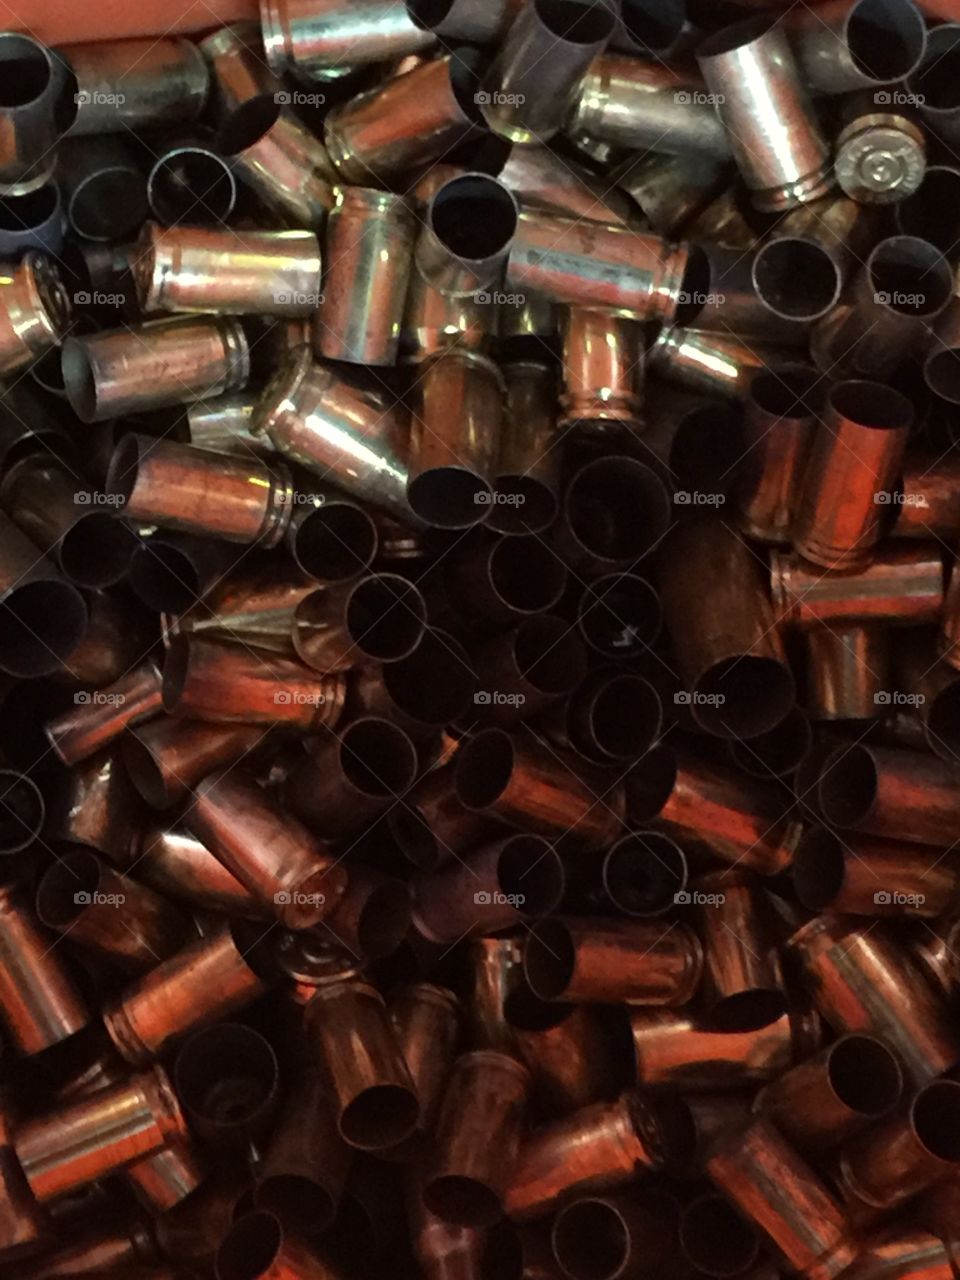 Another way to see empty bullet capsules. 